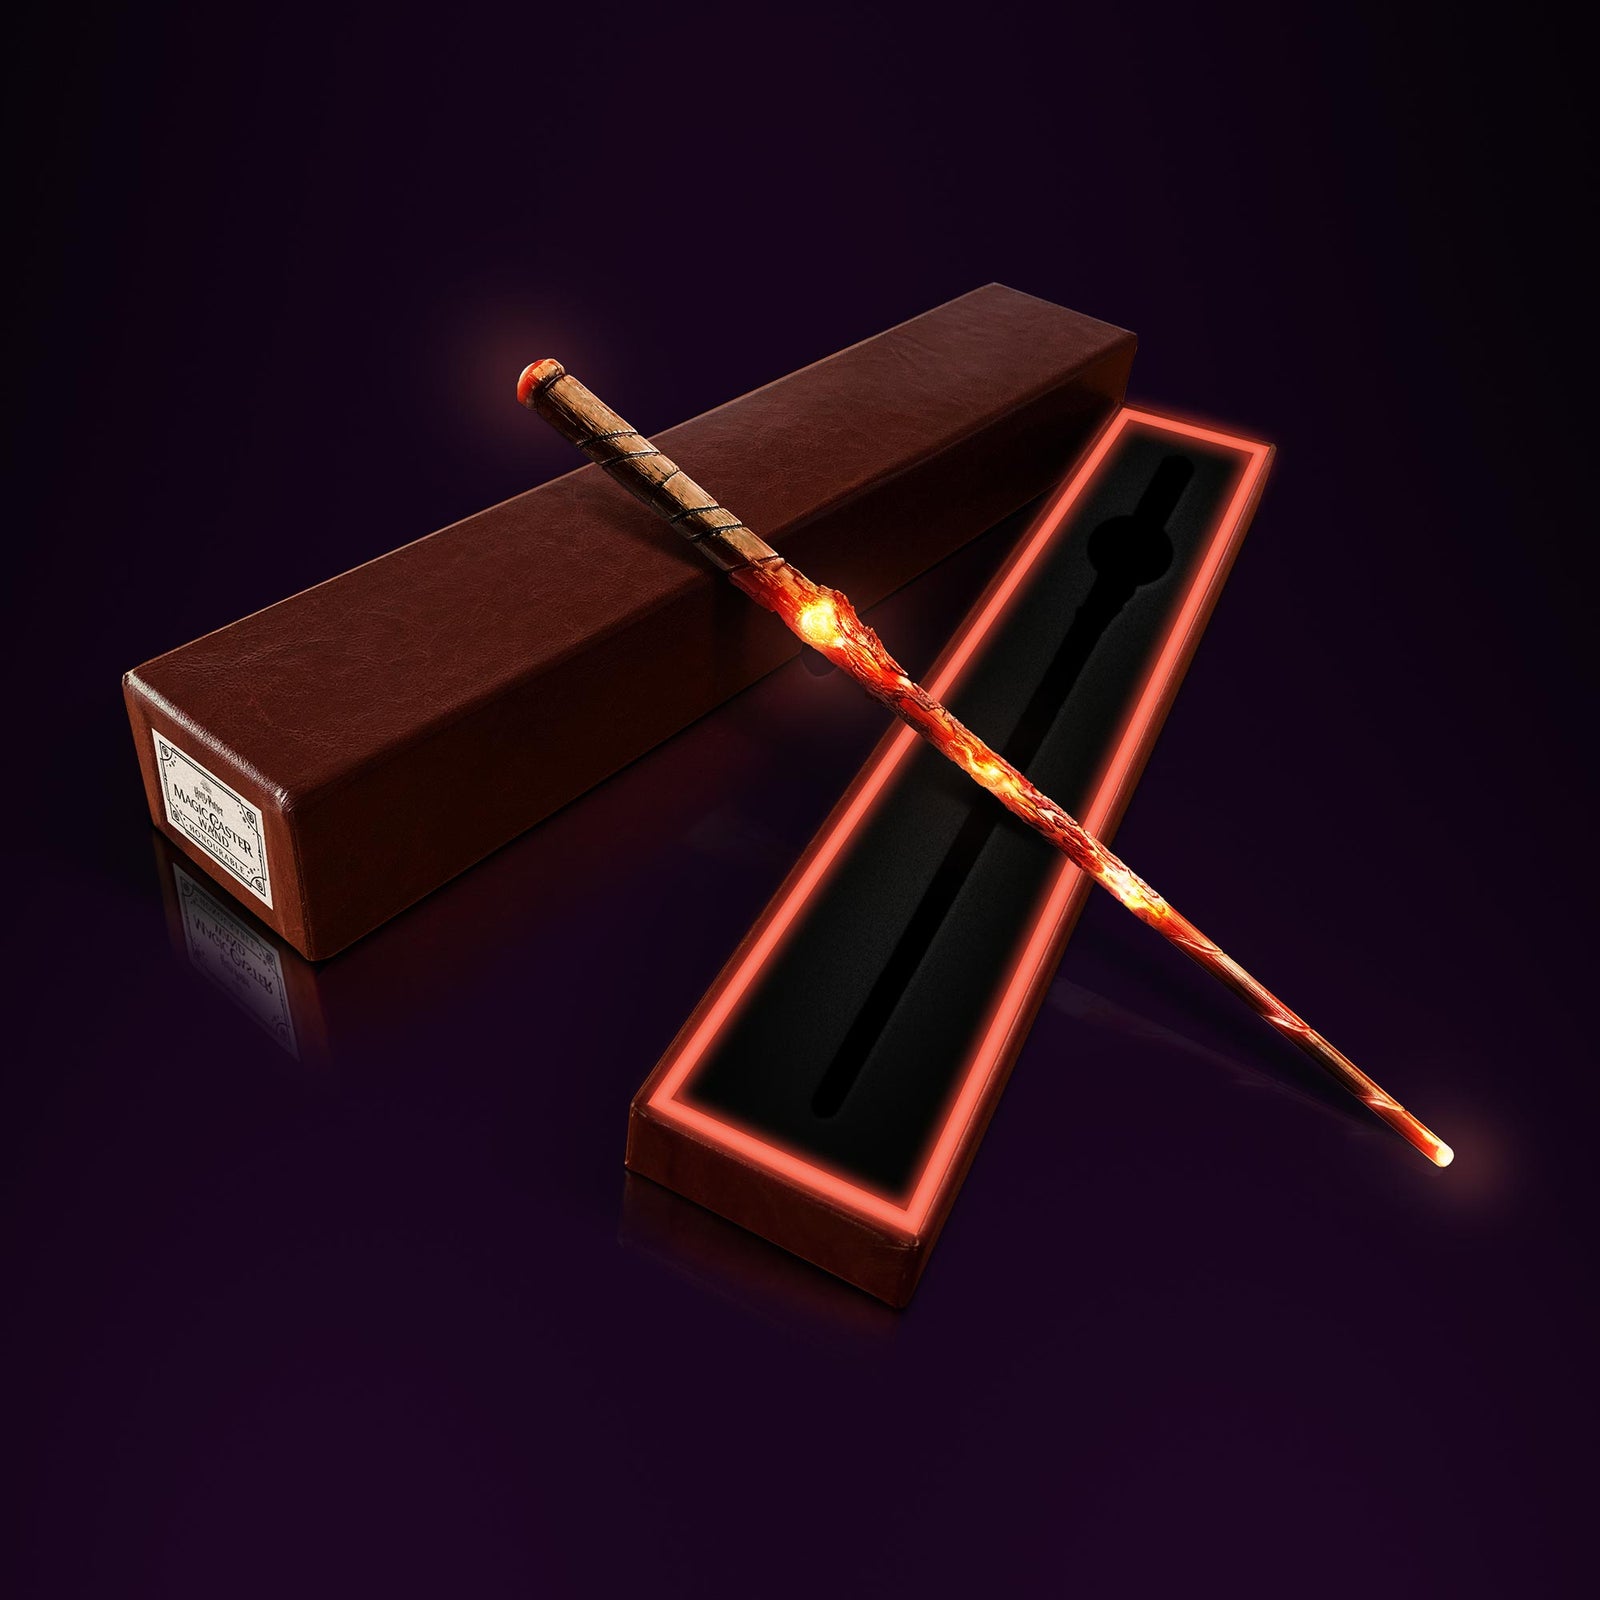 Honourable Honourable Wand glowing red while laying on top of open wand box